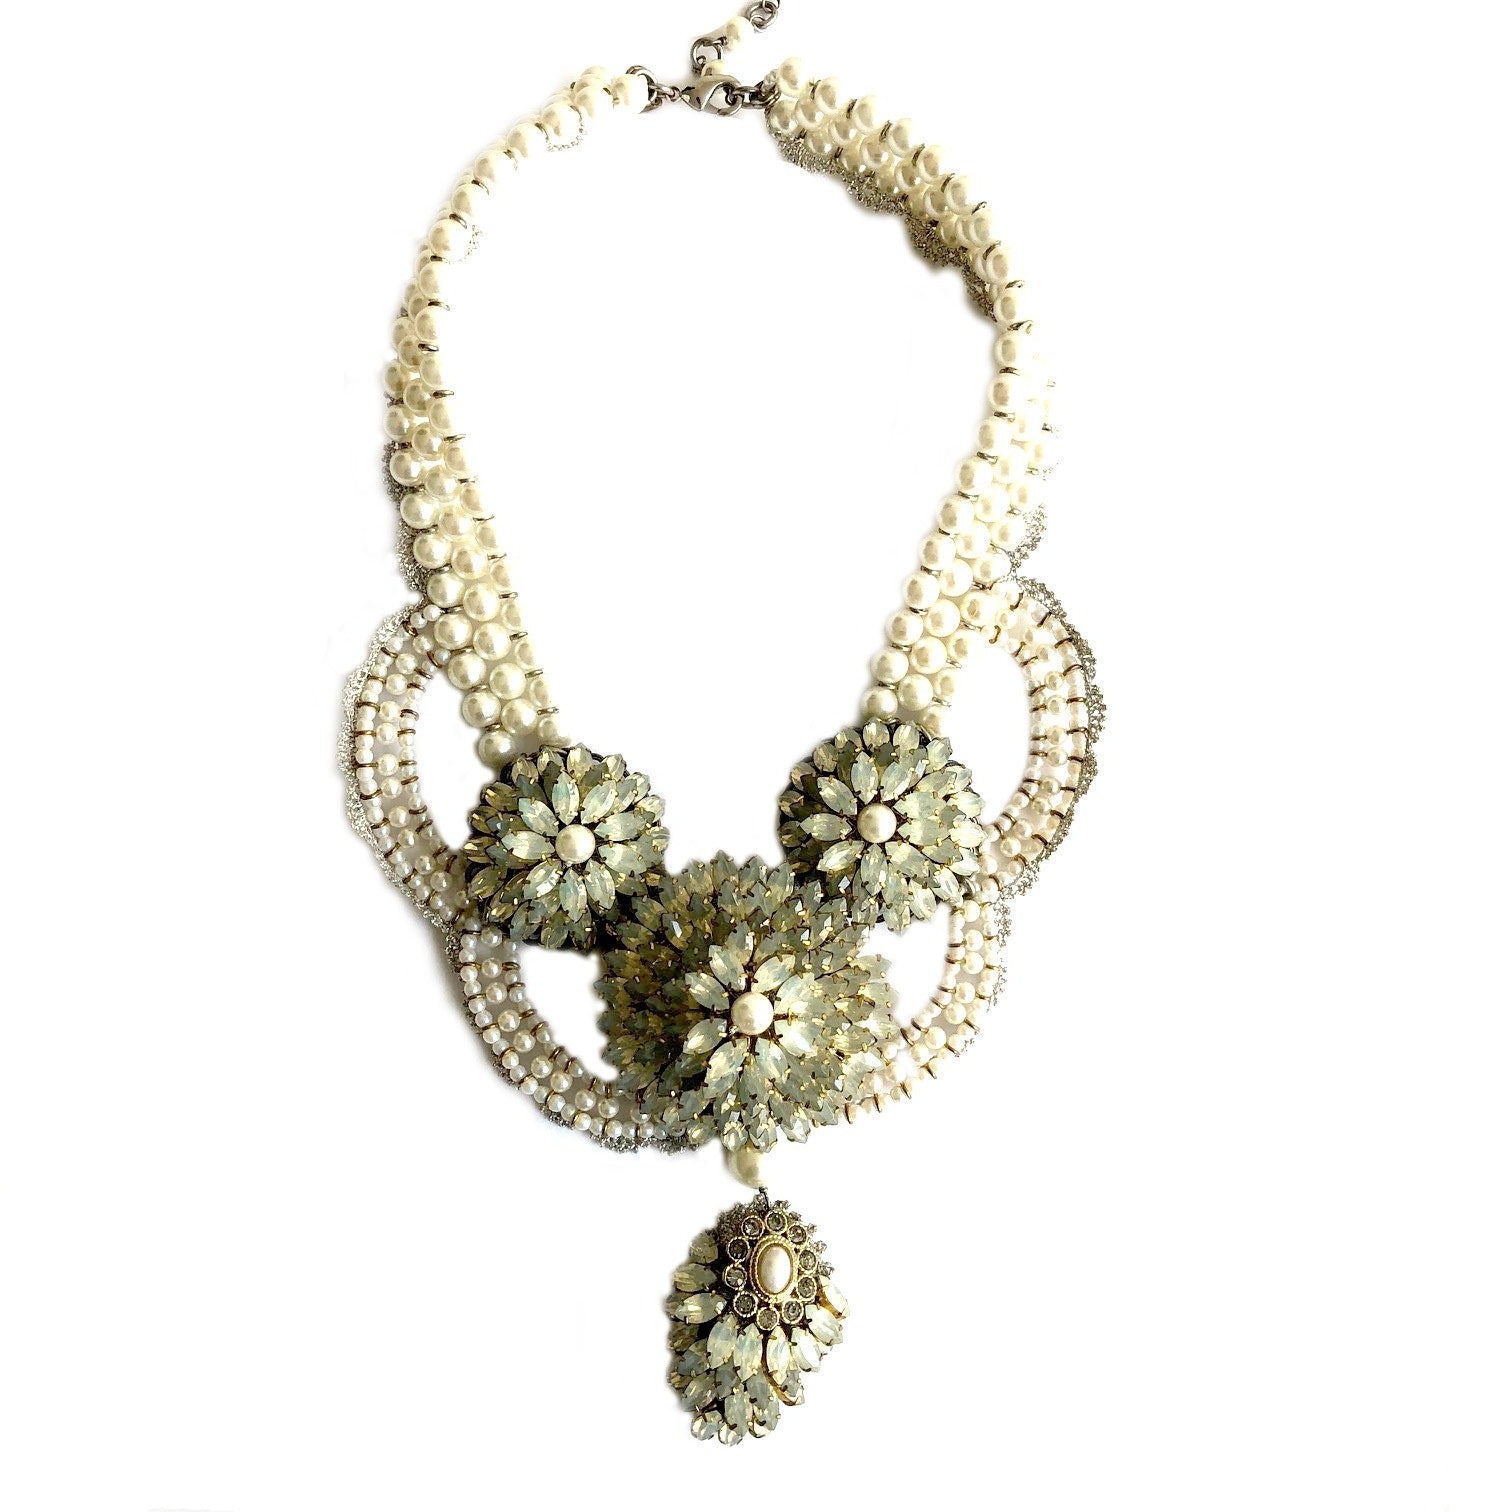 Swarovski Crystals and Pearls Statement Necklace